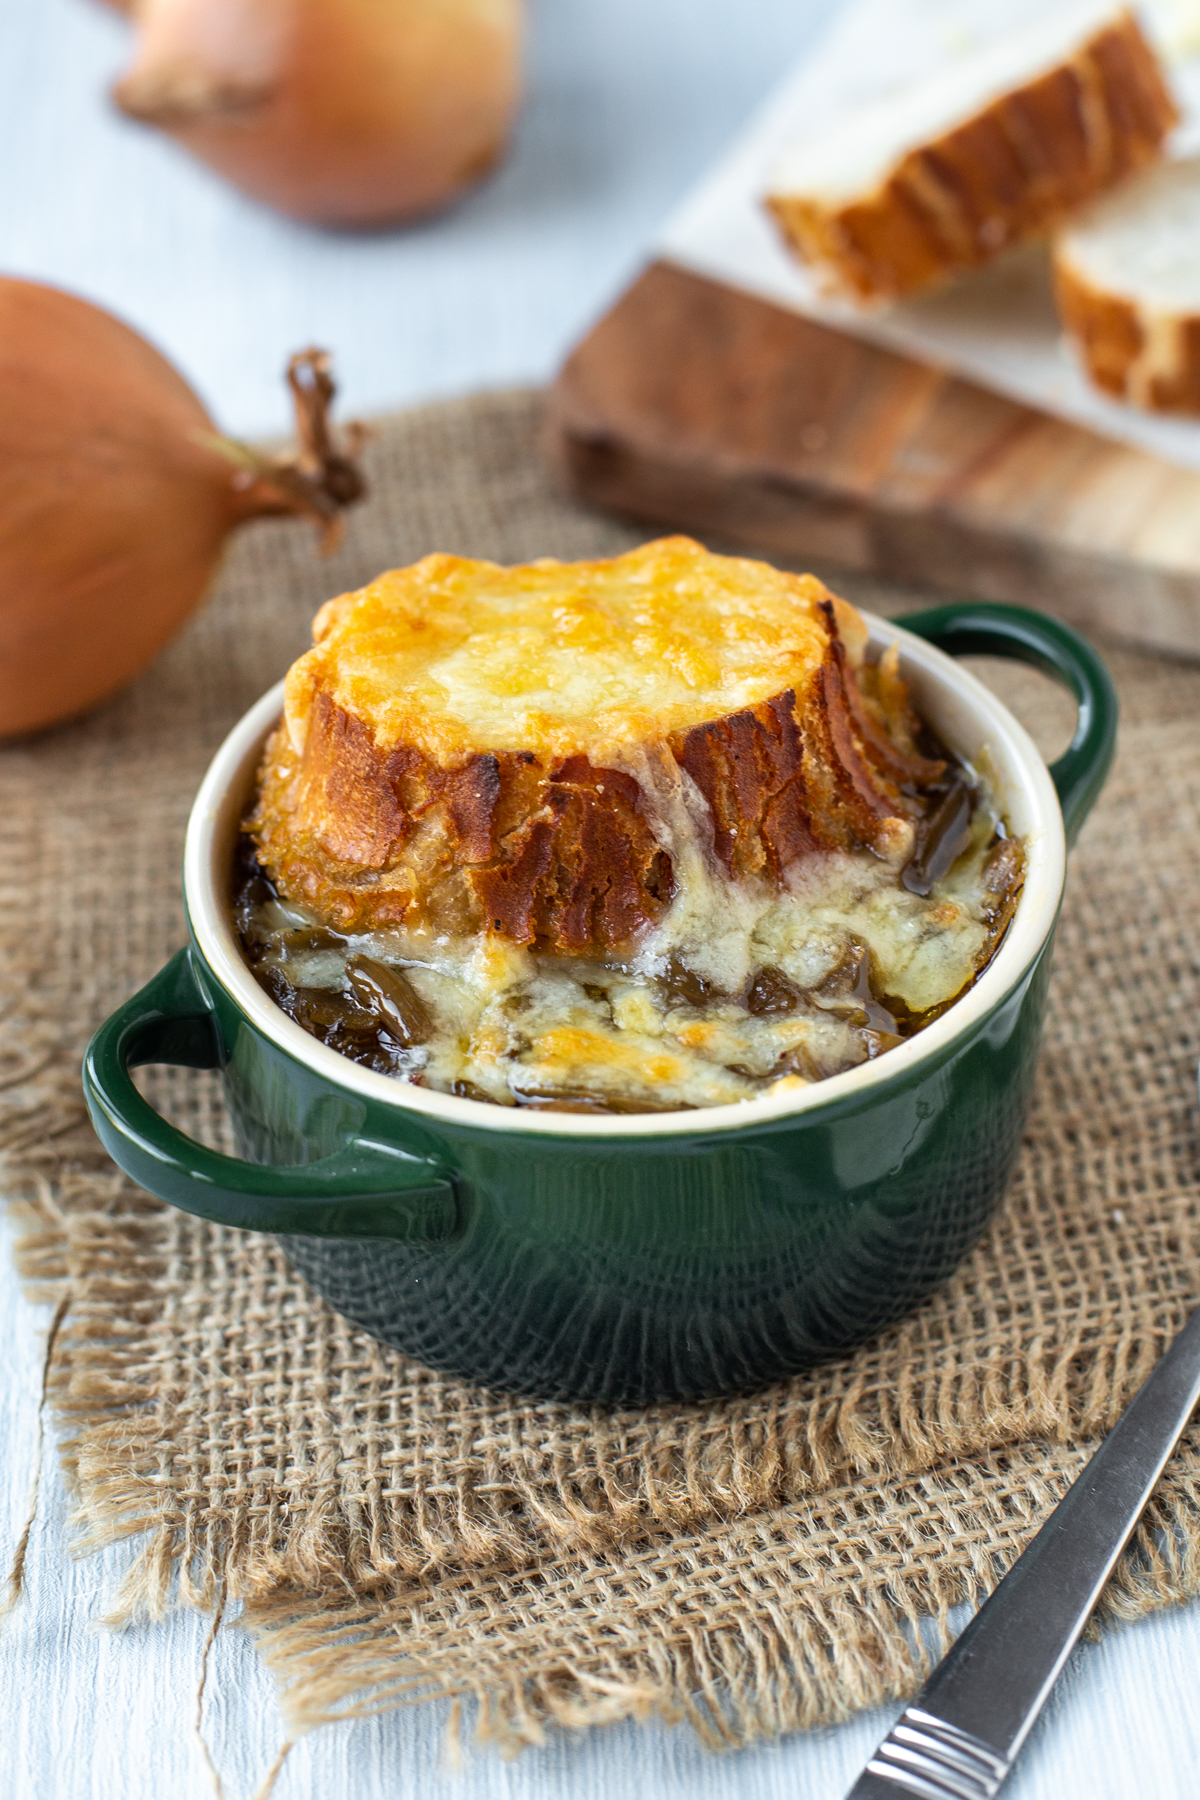 French Onion Soup - Easy Slow Cooker Recipe - The Magical Slow Cooker